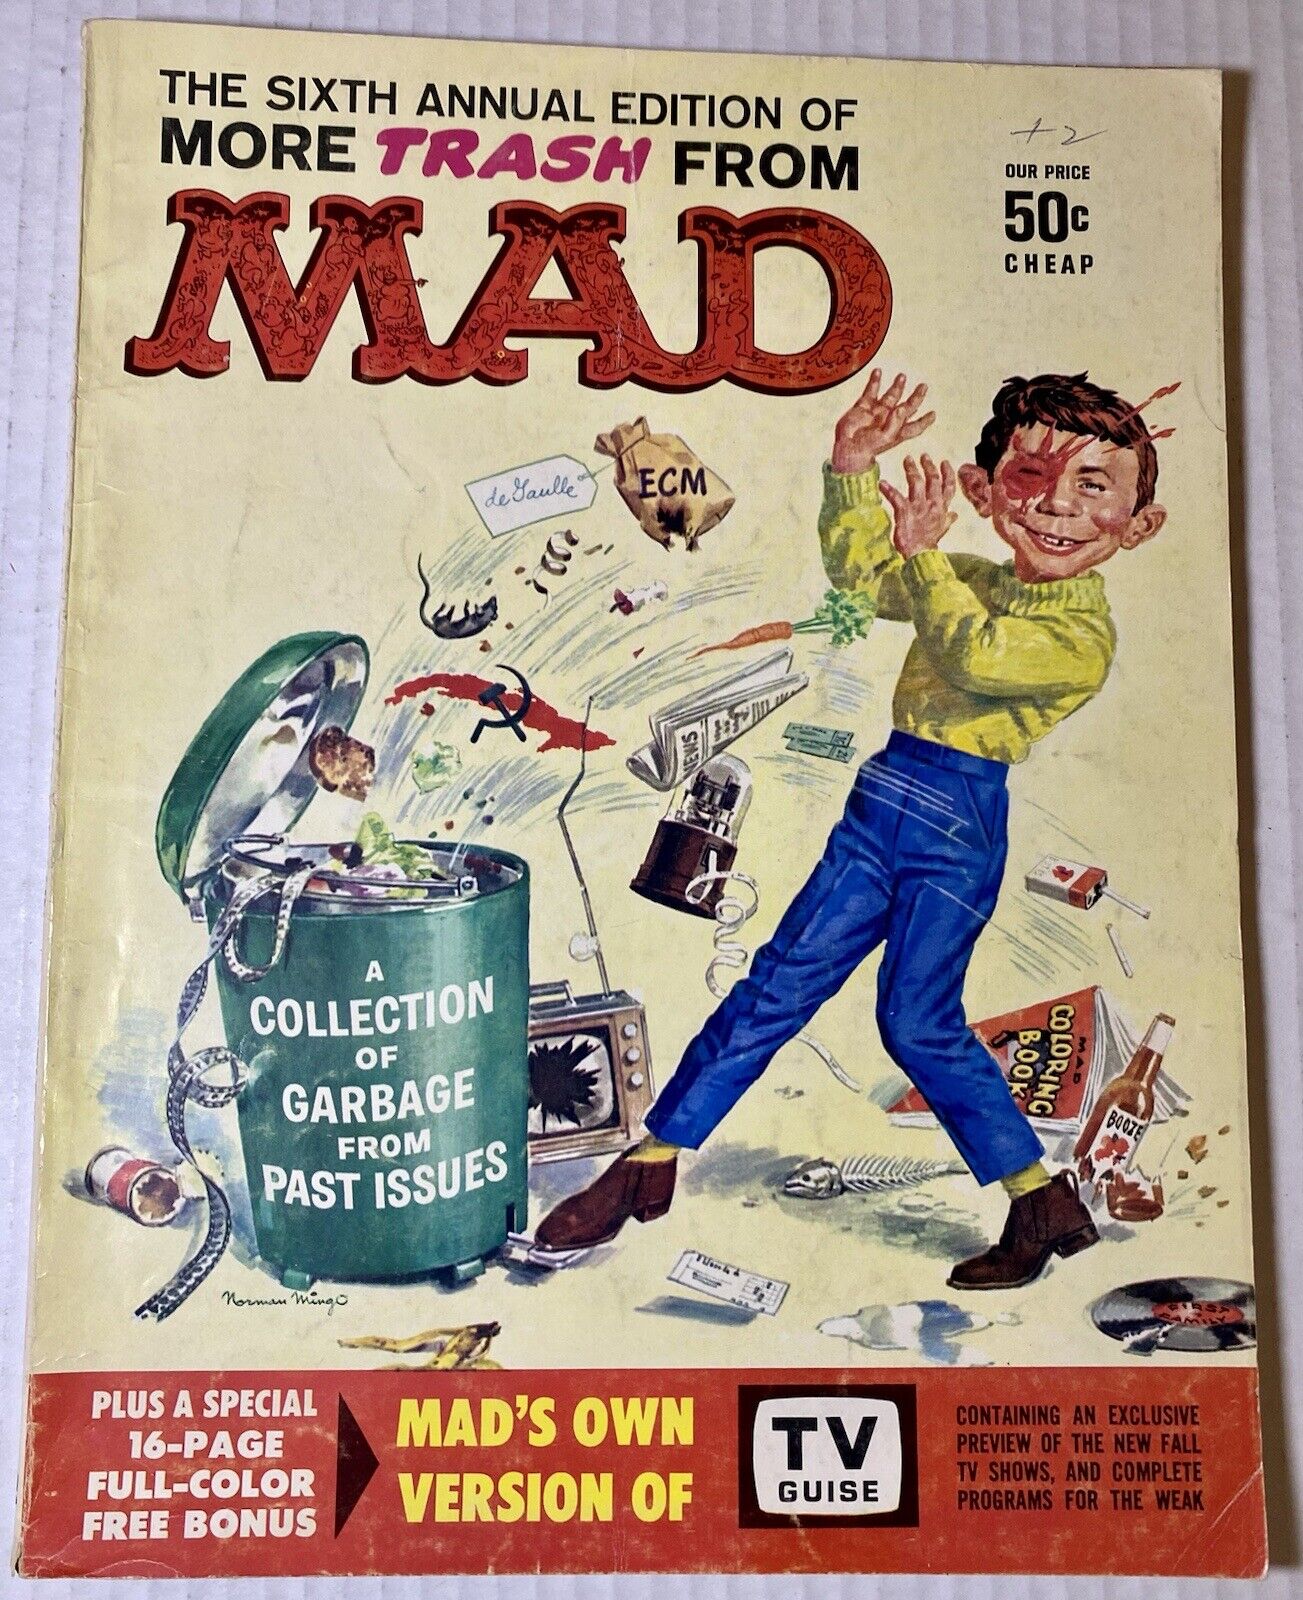 Vintage MAD Magazine Sixth Annual Edition Worst from MAD 1963 Issue w/Insert